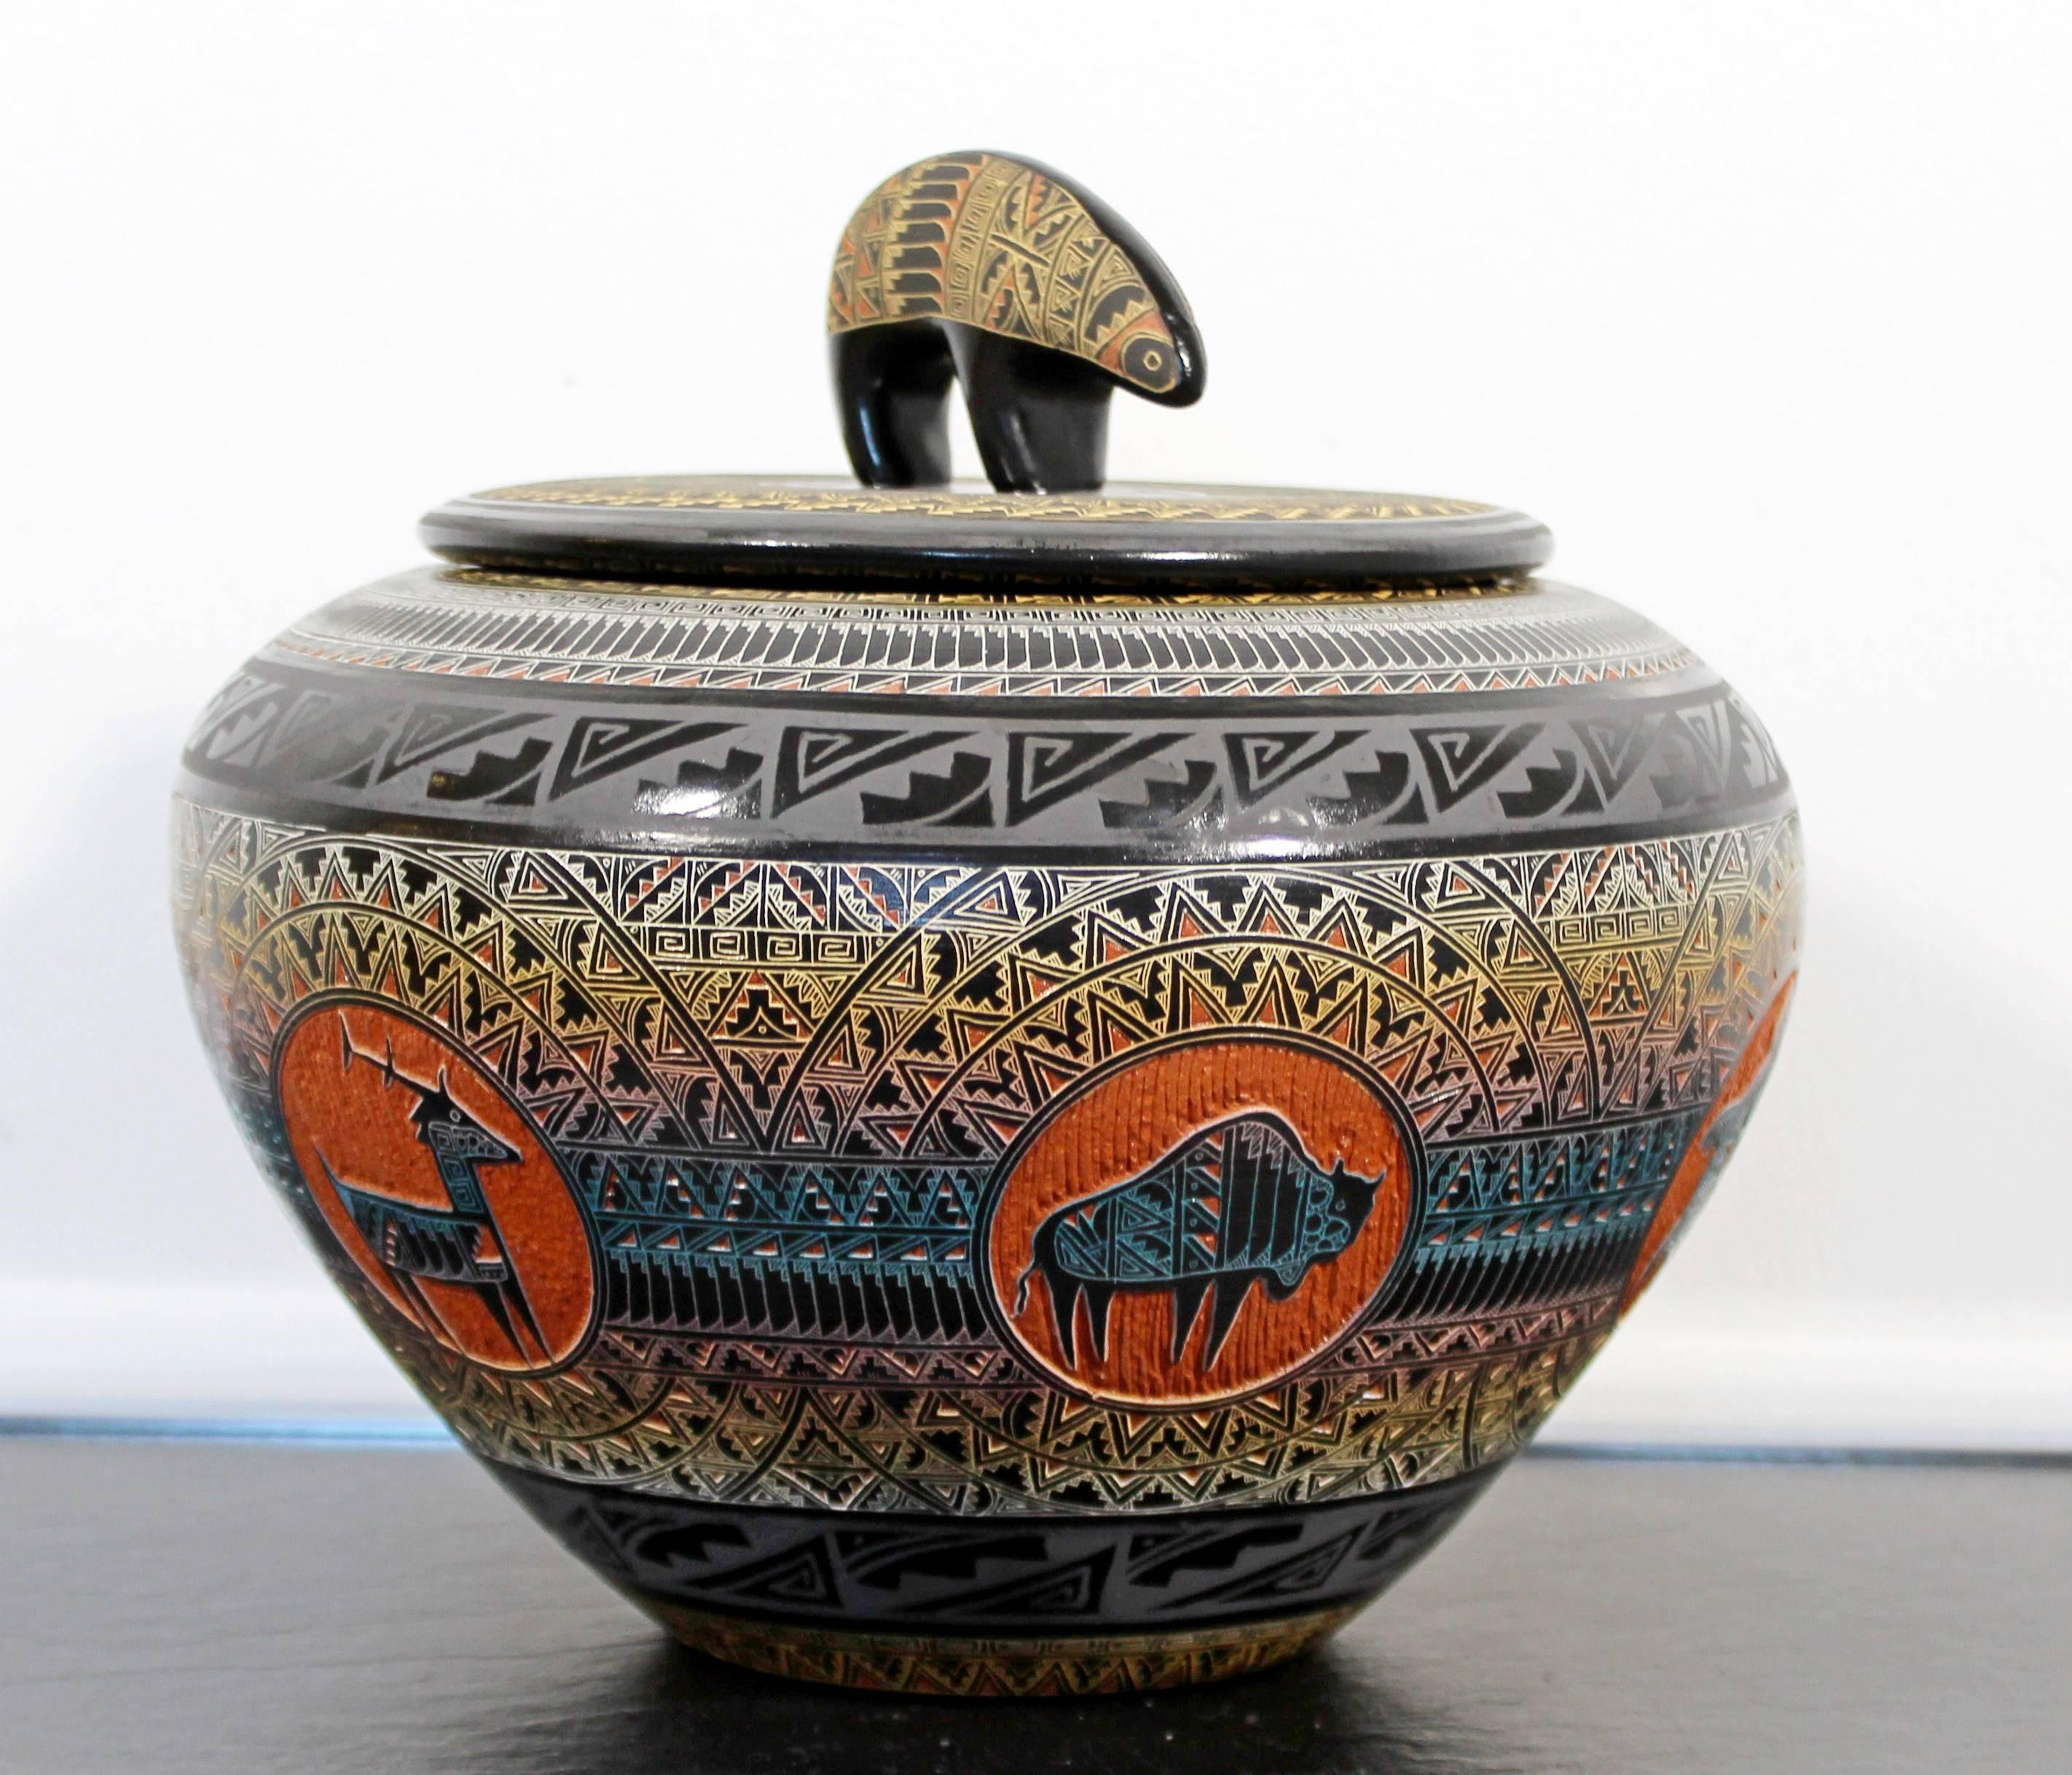 Marvin Blackmore was born in Farmington, New Mexico. Throughout the years he has mastered the art of pottery and is always innovating new ideas. His pottery reflects multiple layers of clay slips in which he etches through to each wanted layer. The